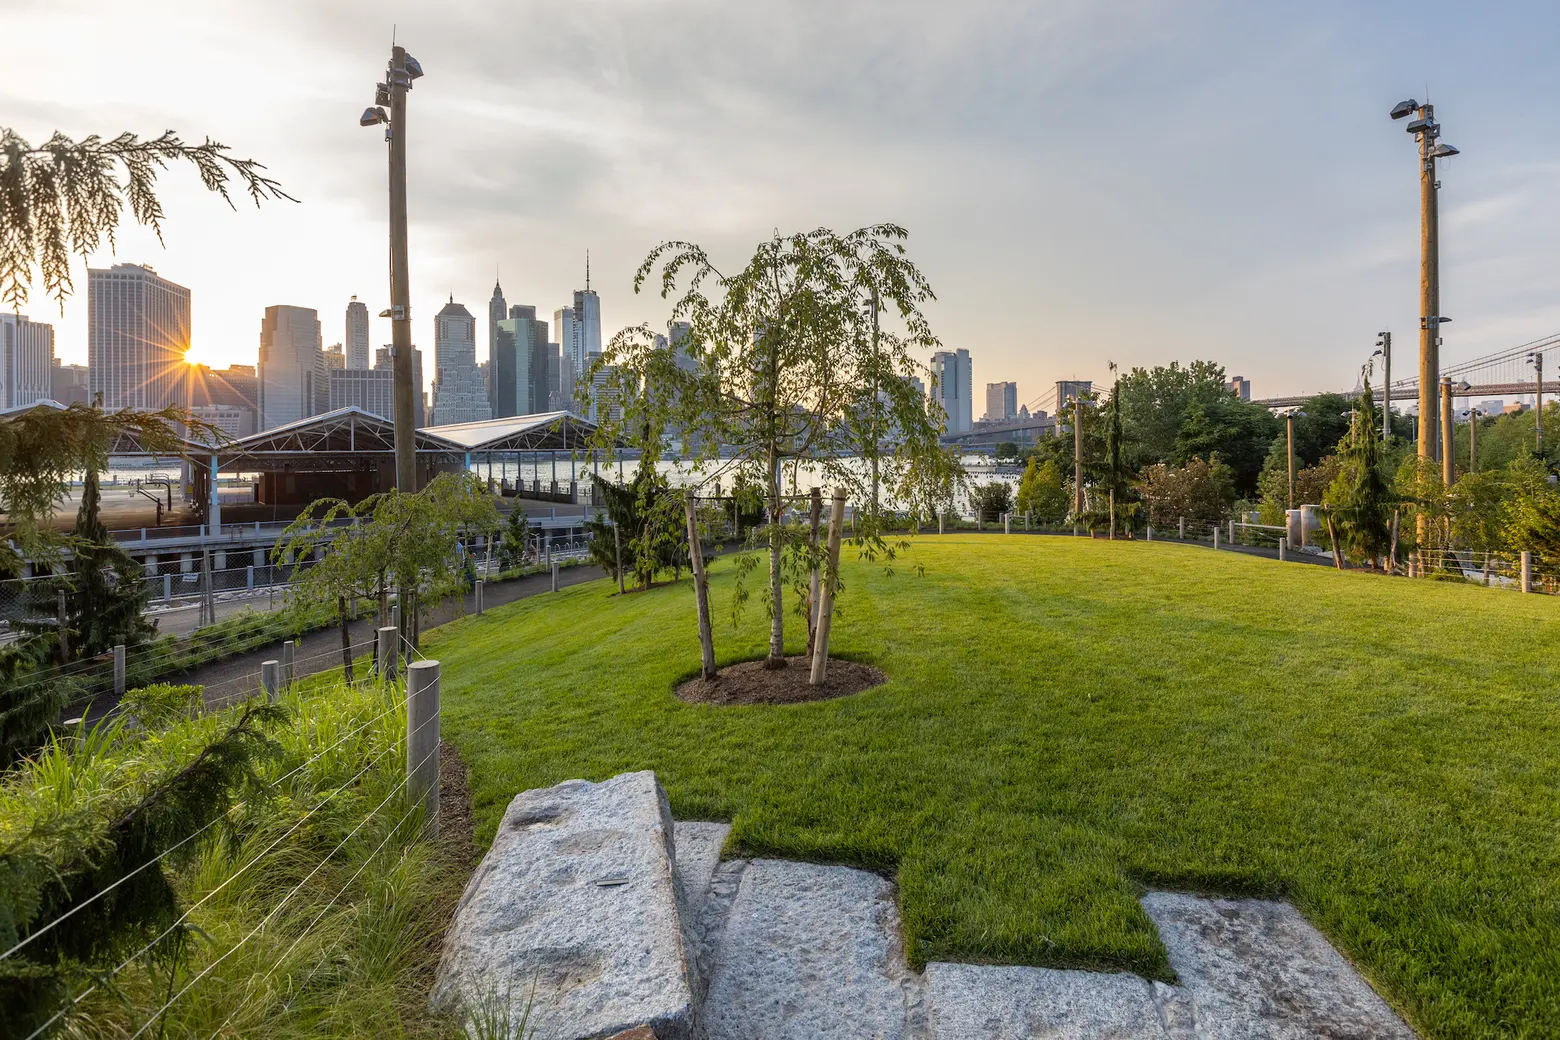 Three acres of new green space open at Brooklyn Bridge Park